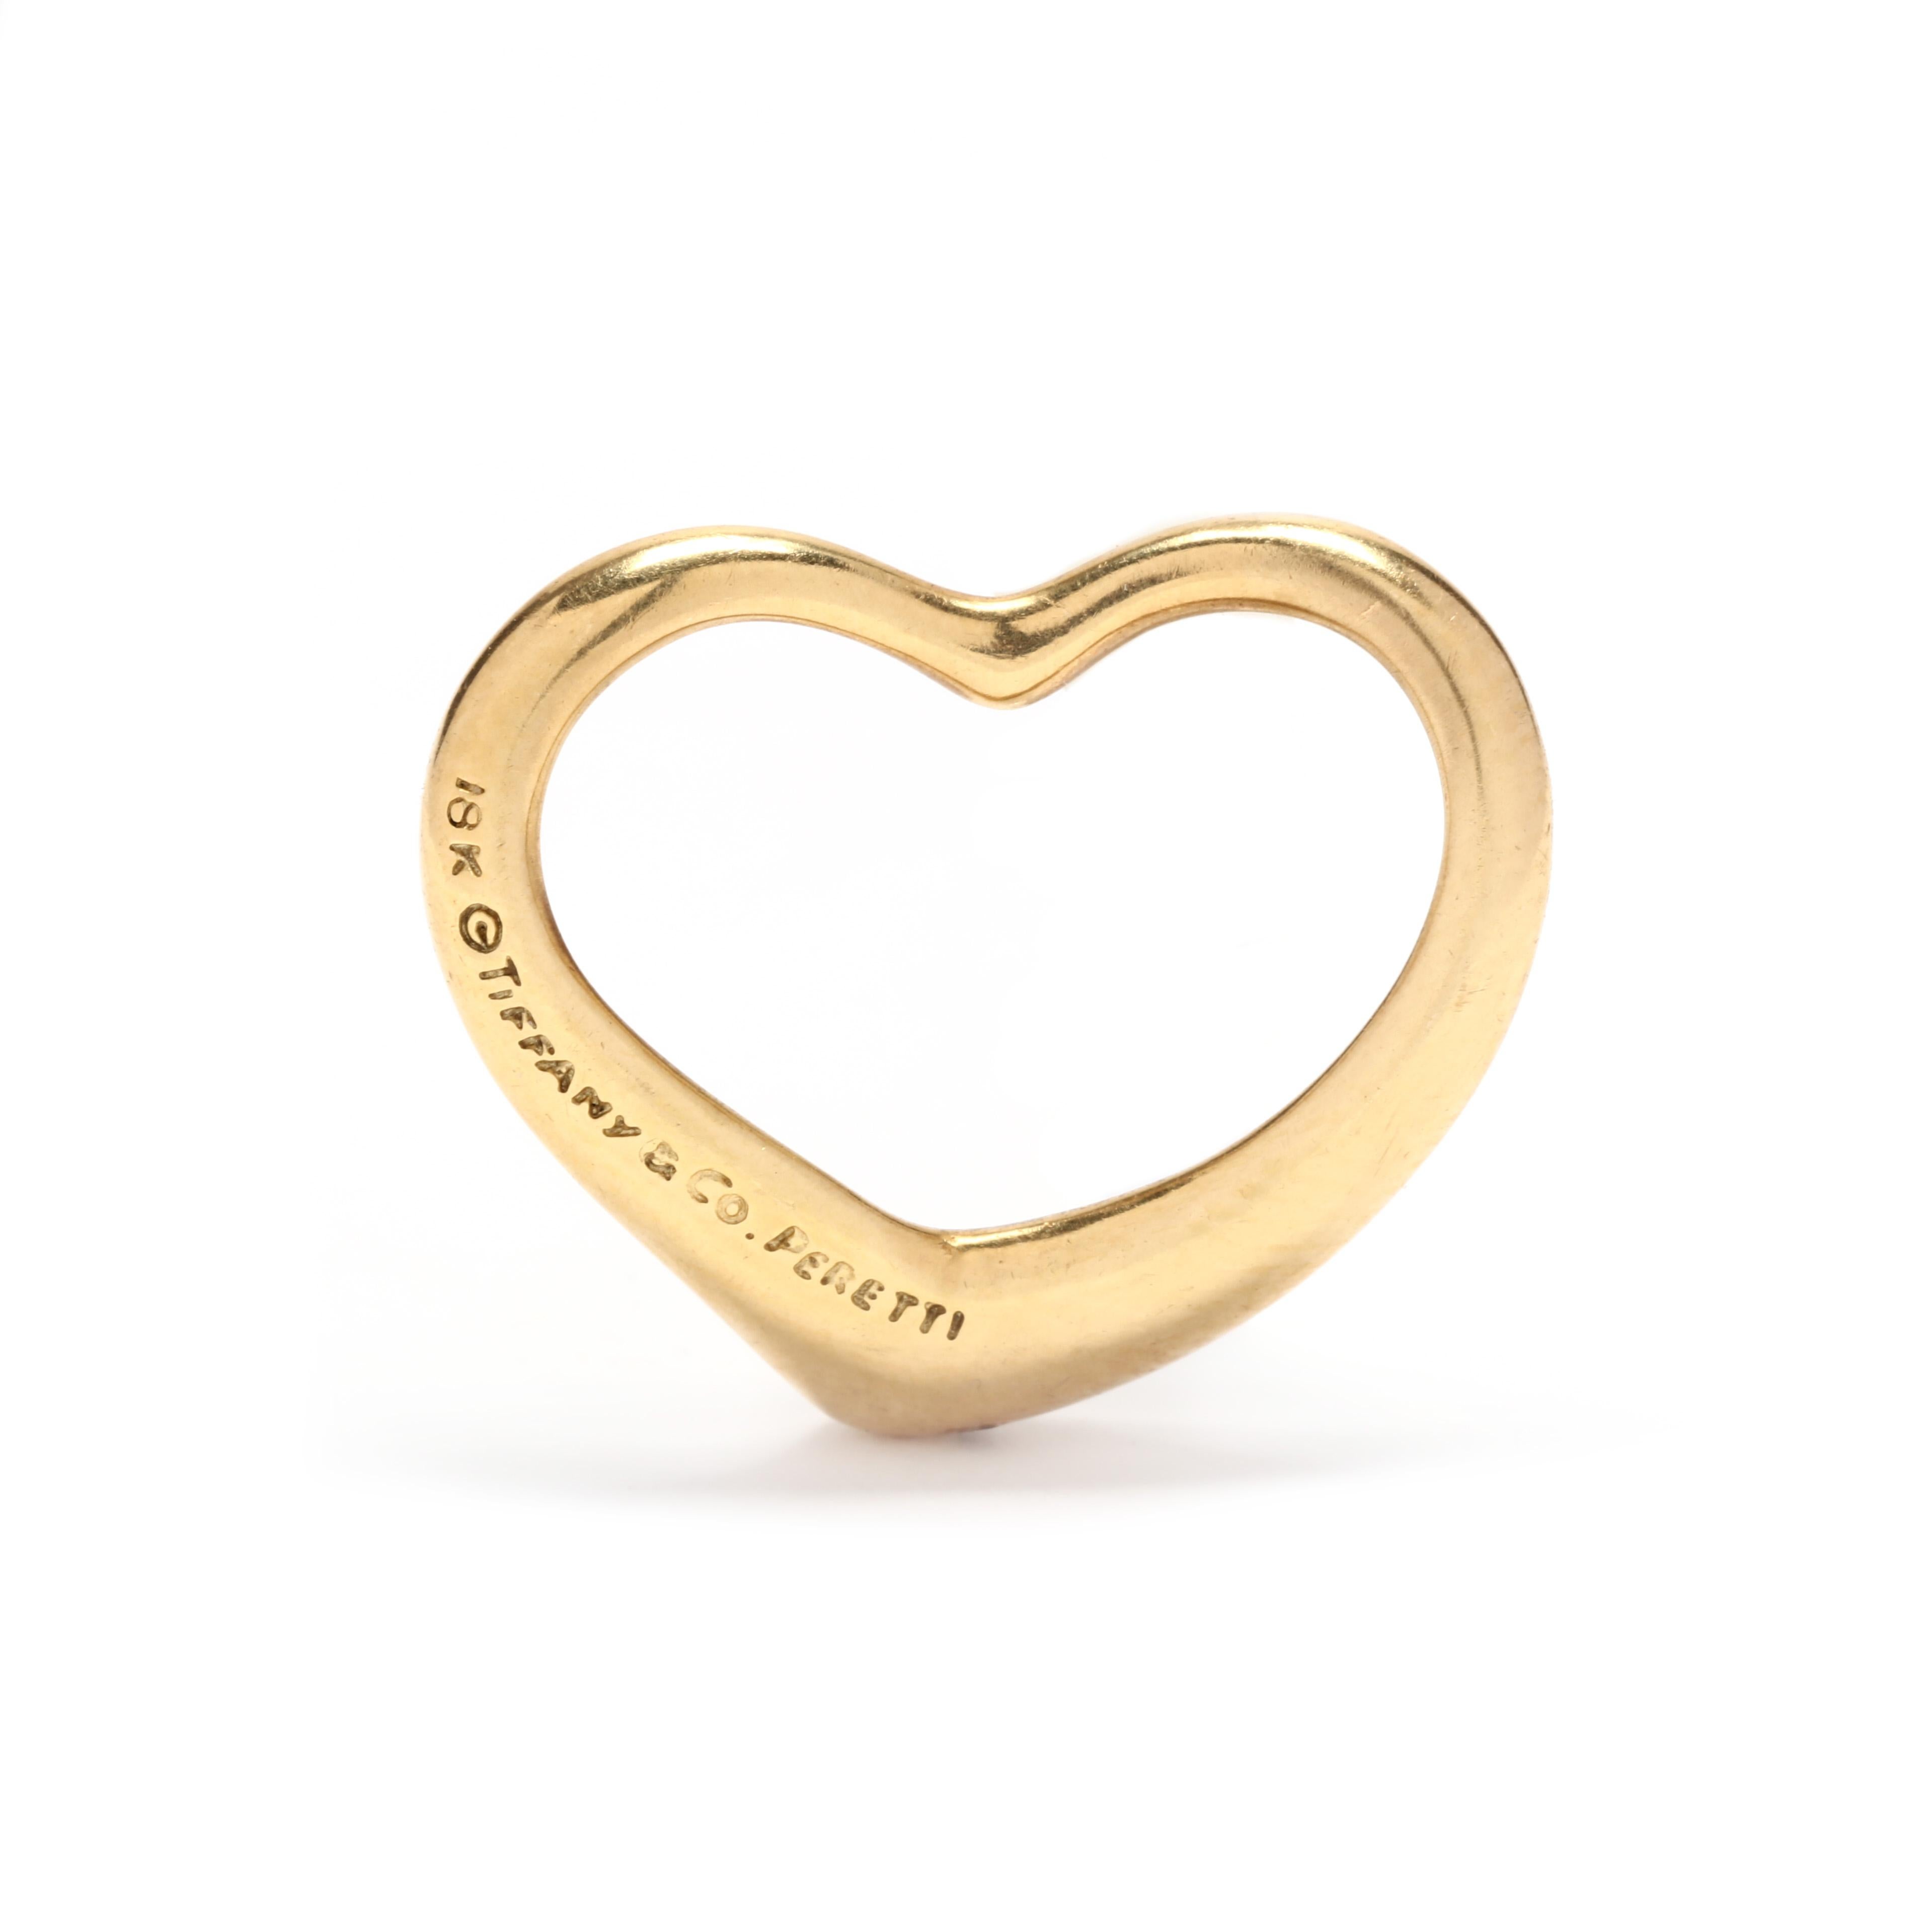 An 18 karat yellow gold heart charm design by Elsa Peretti for Tiffany and Company. This charm features an open heart design that can be added to any chain or cord!

Length: 3/4 in.

Width: 11/16 in.

Weight: 2.50 dwts.

Ring Sizings &